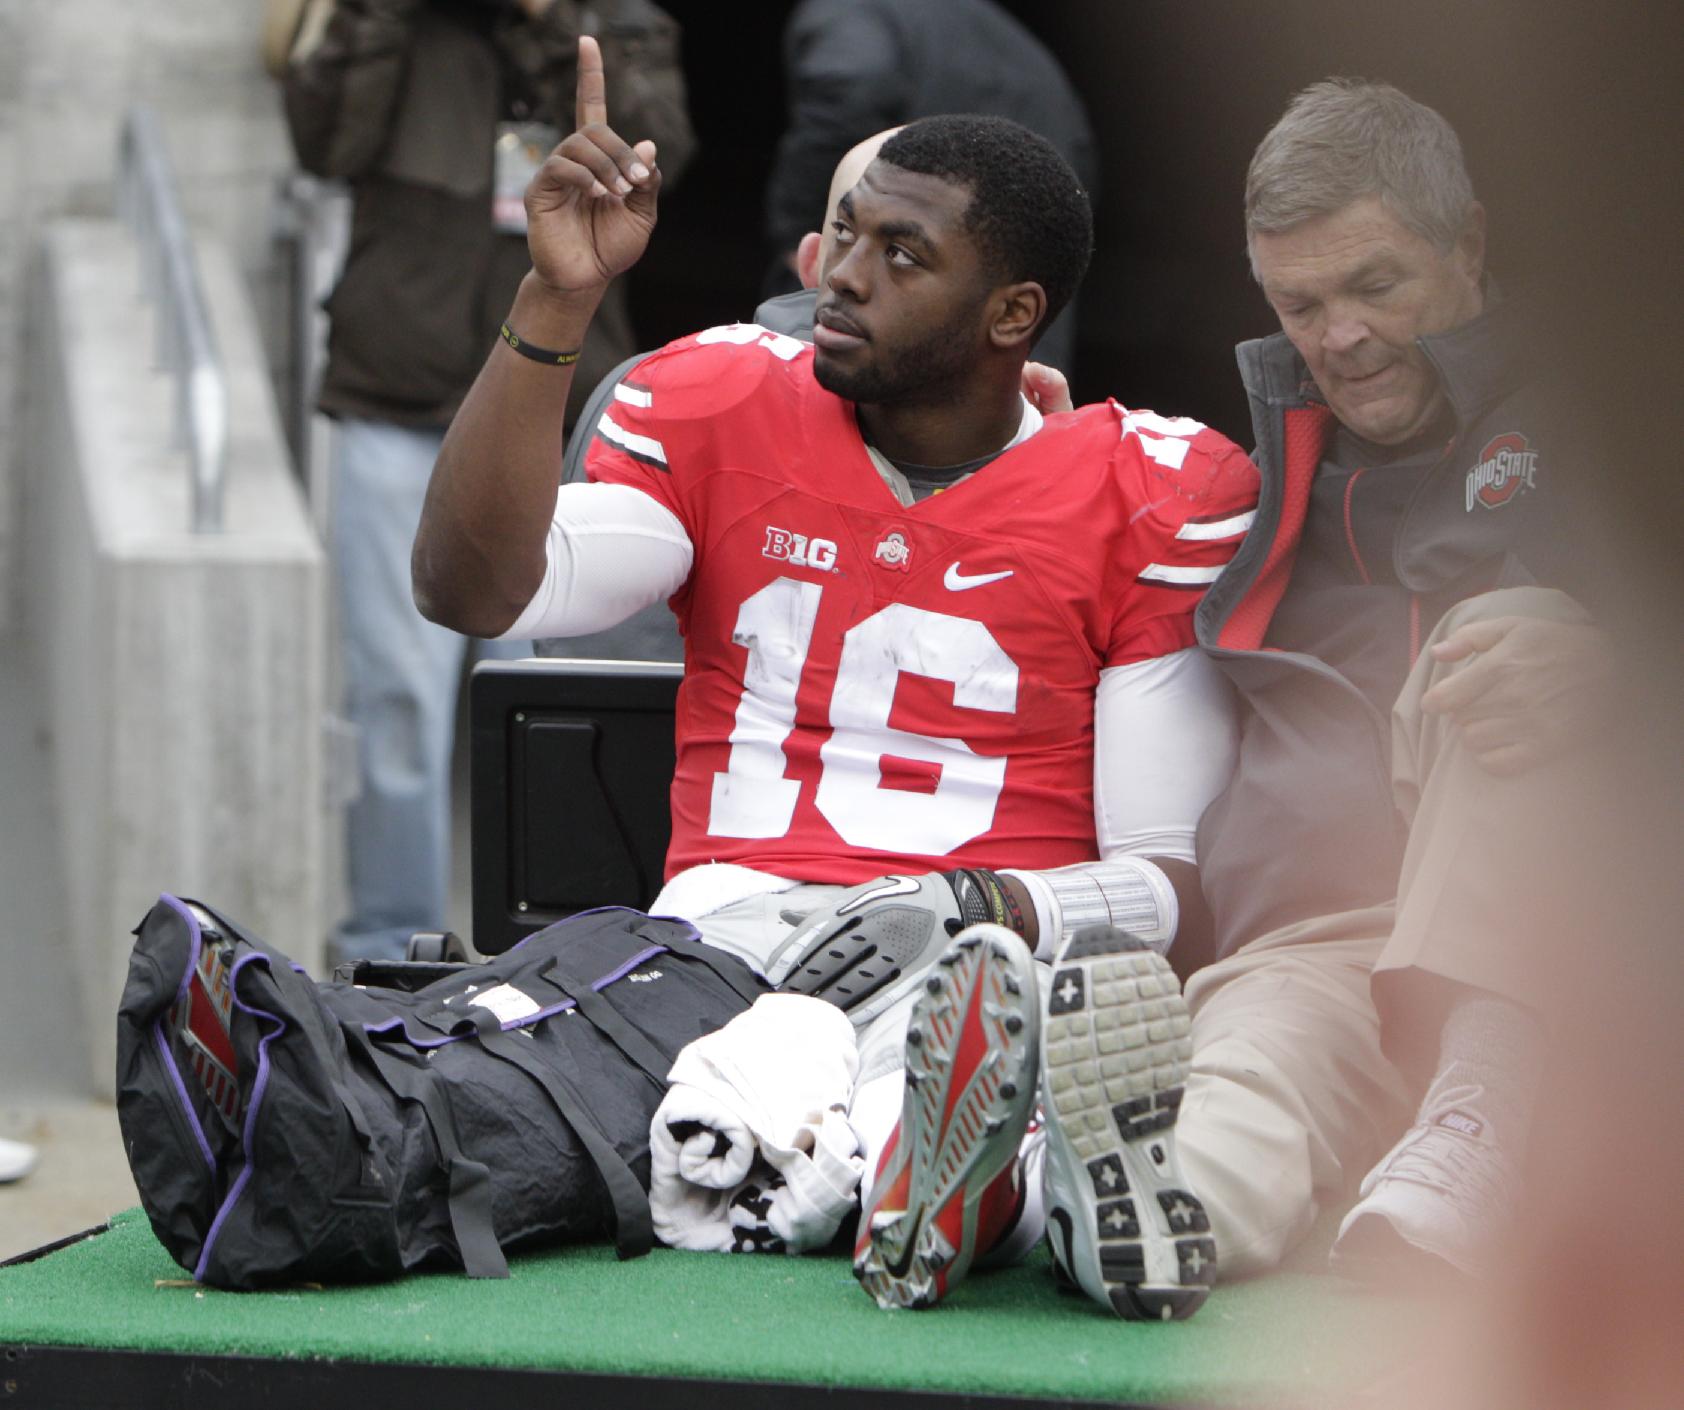 Ohio State quarterback J.T. Barrett acknowledges fans as he is driven from the field after an injury in the fourth quarter of an NCAA college football game Saturday, Nov. 29, 2014, in Columbus, Ohio. Ohio State beat Michigan 42-28. (AP Photo/Jay LaPrete)